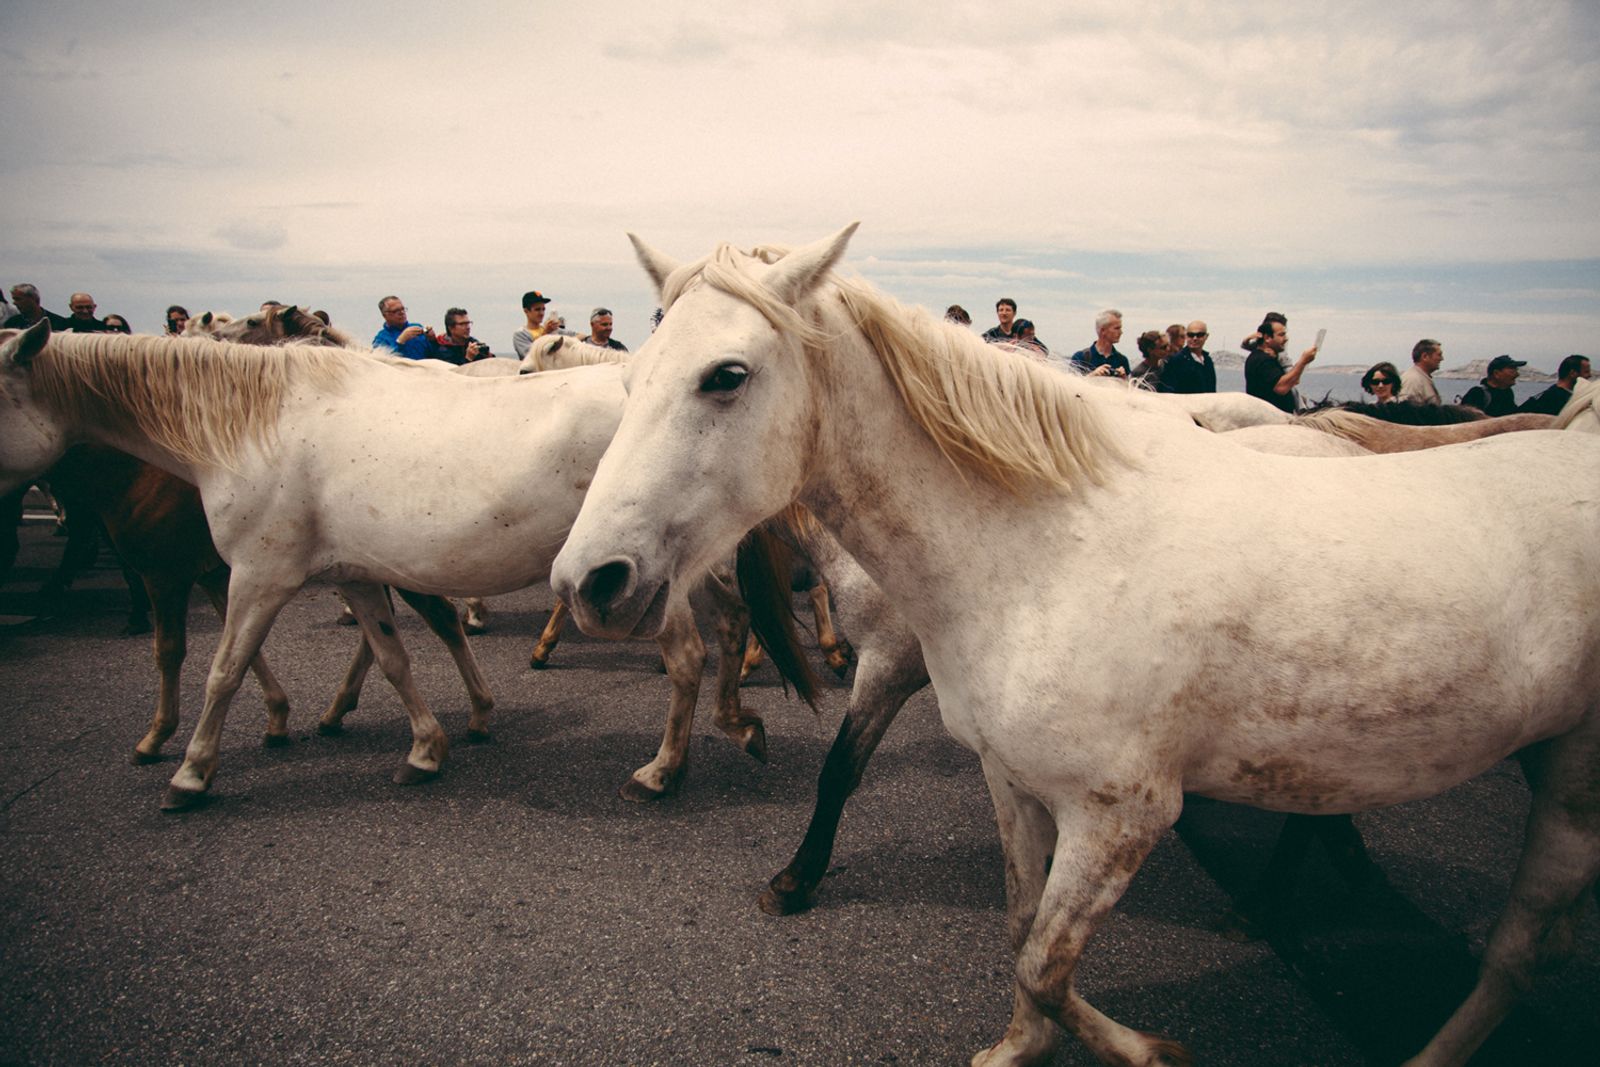 © Francesca Todde - Image from the TransHumance photography project